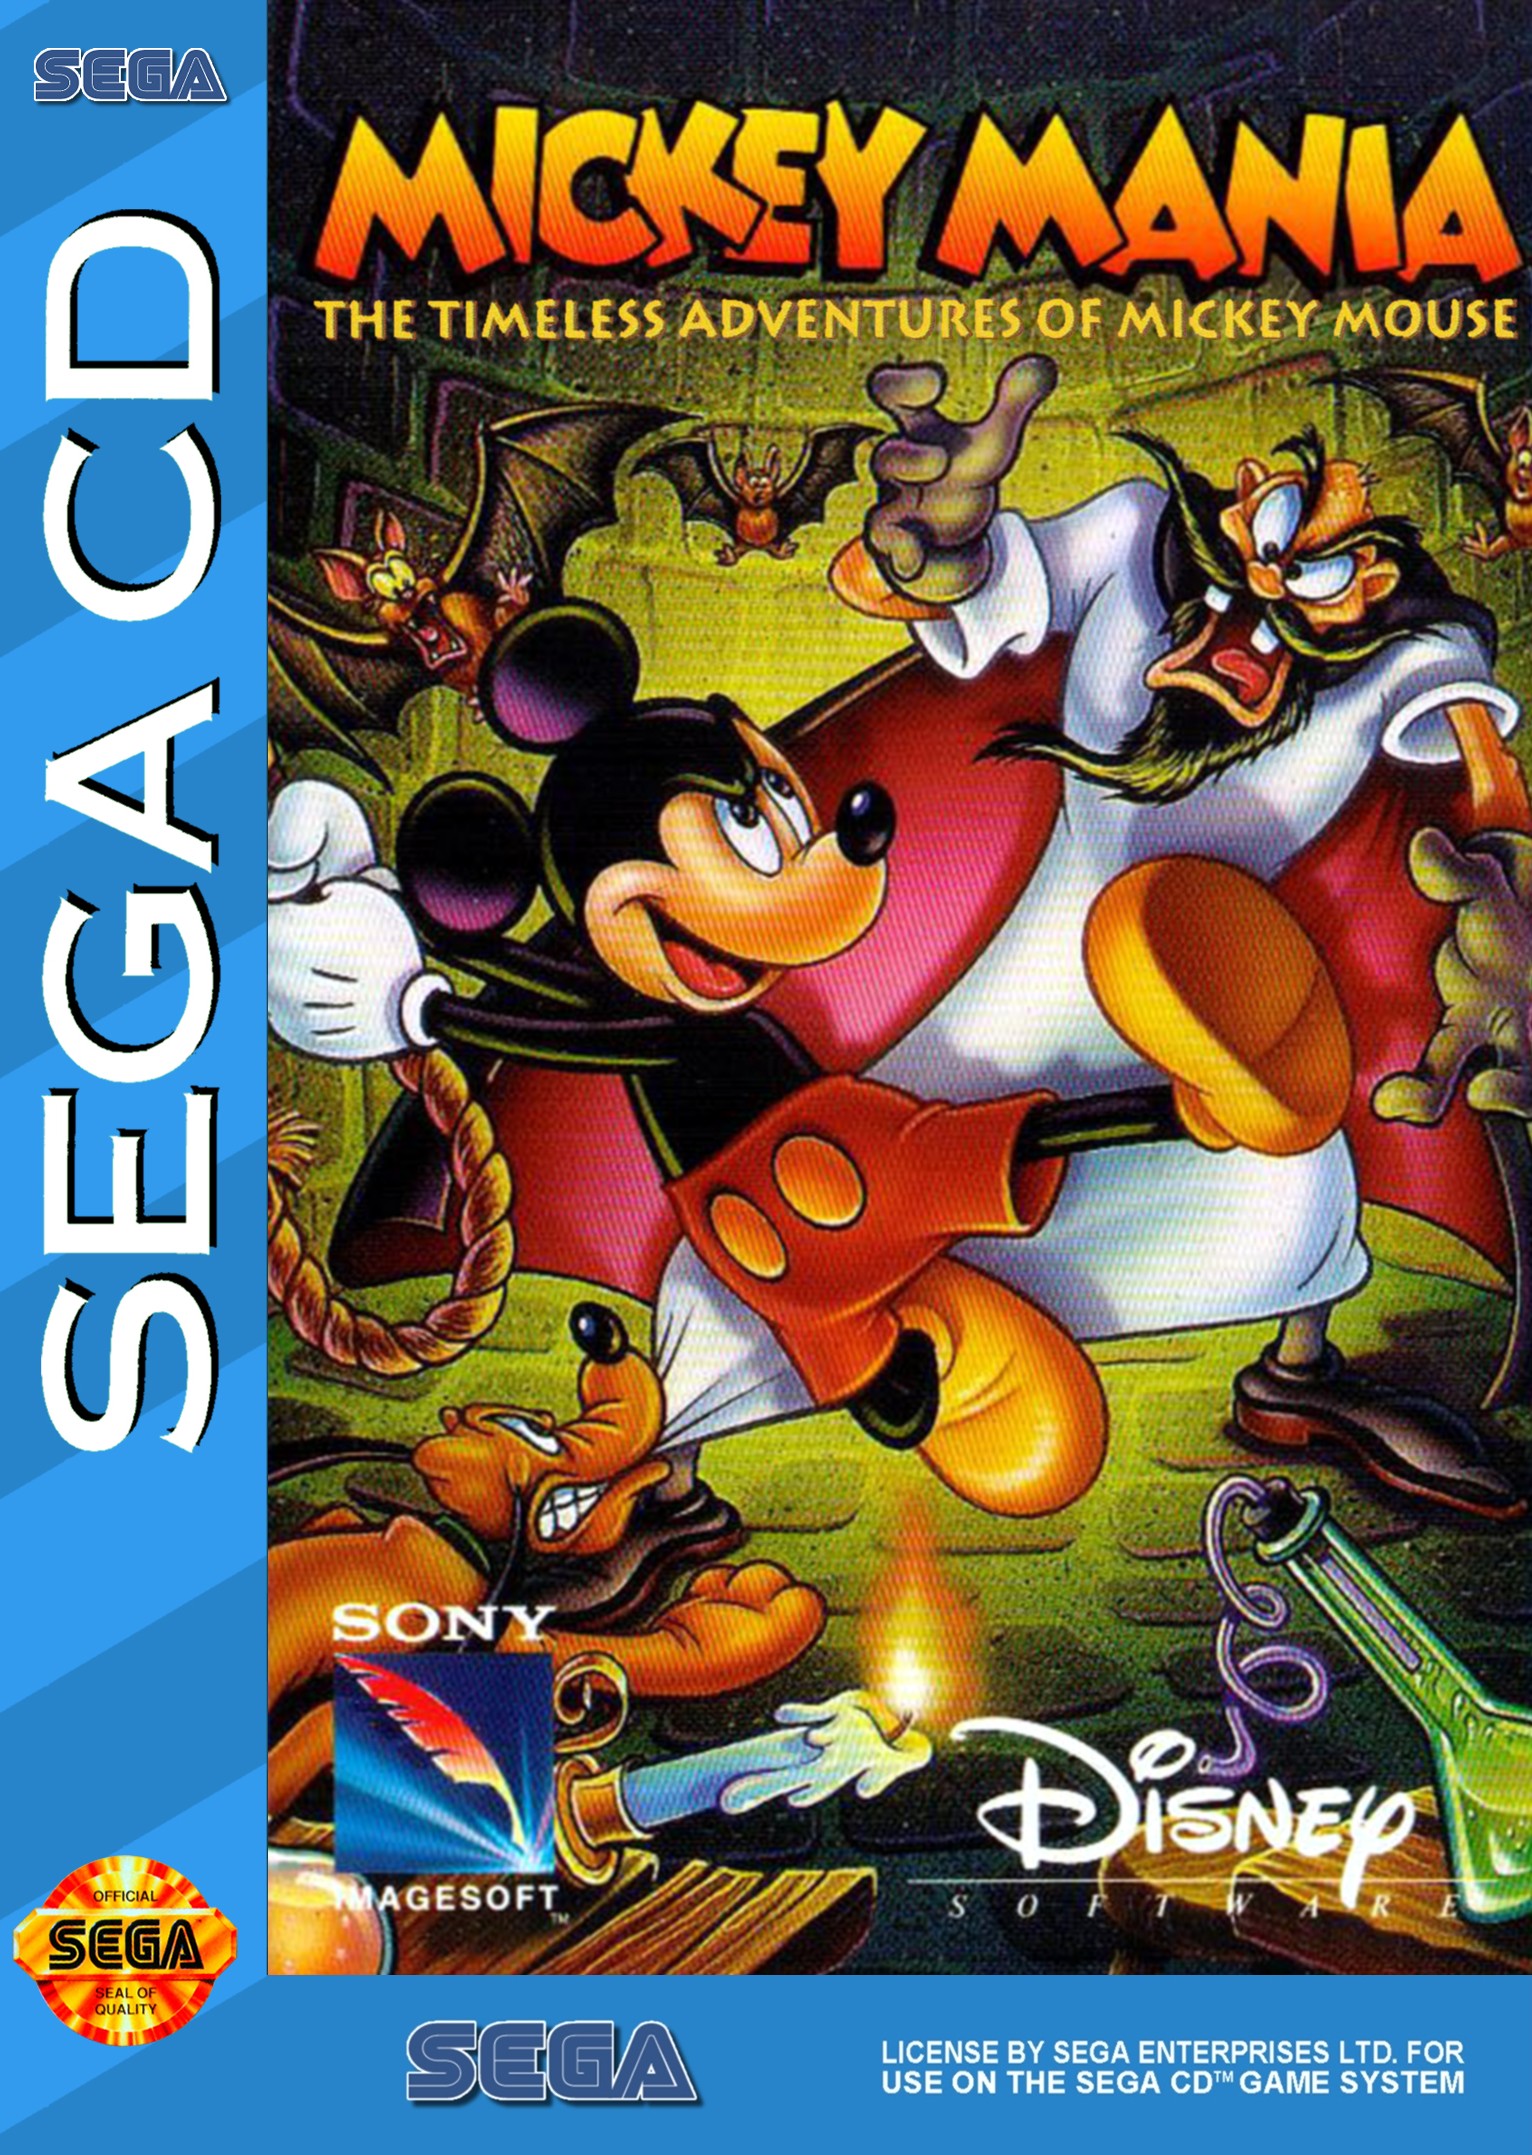 'Mickey Mania: The Timeless Adventures of Mickey Mouse'